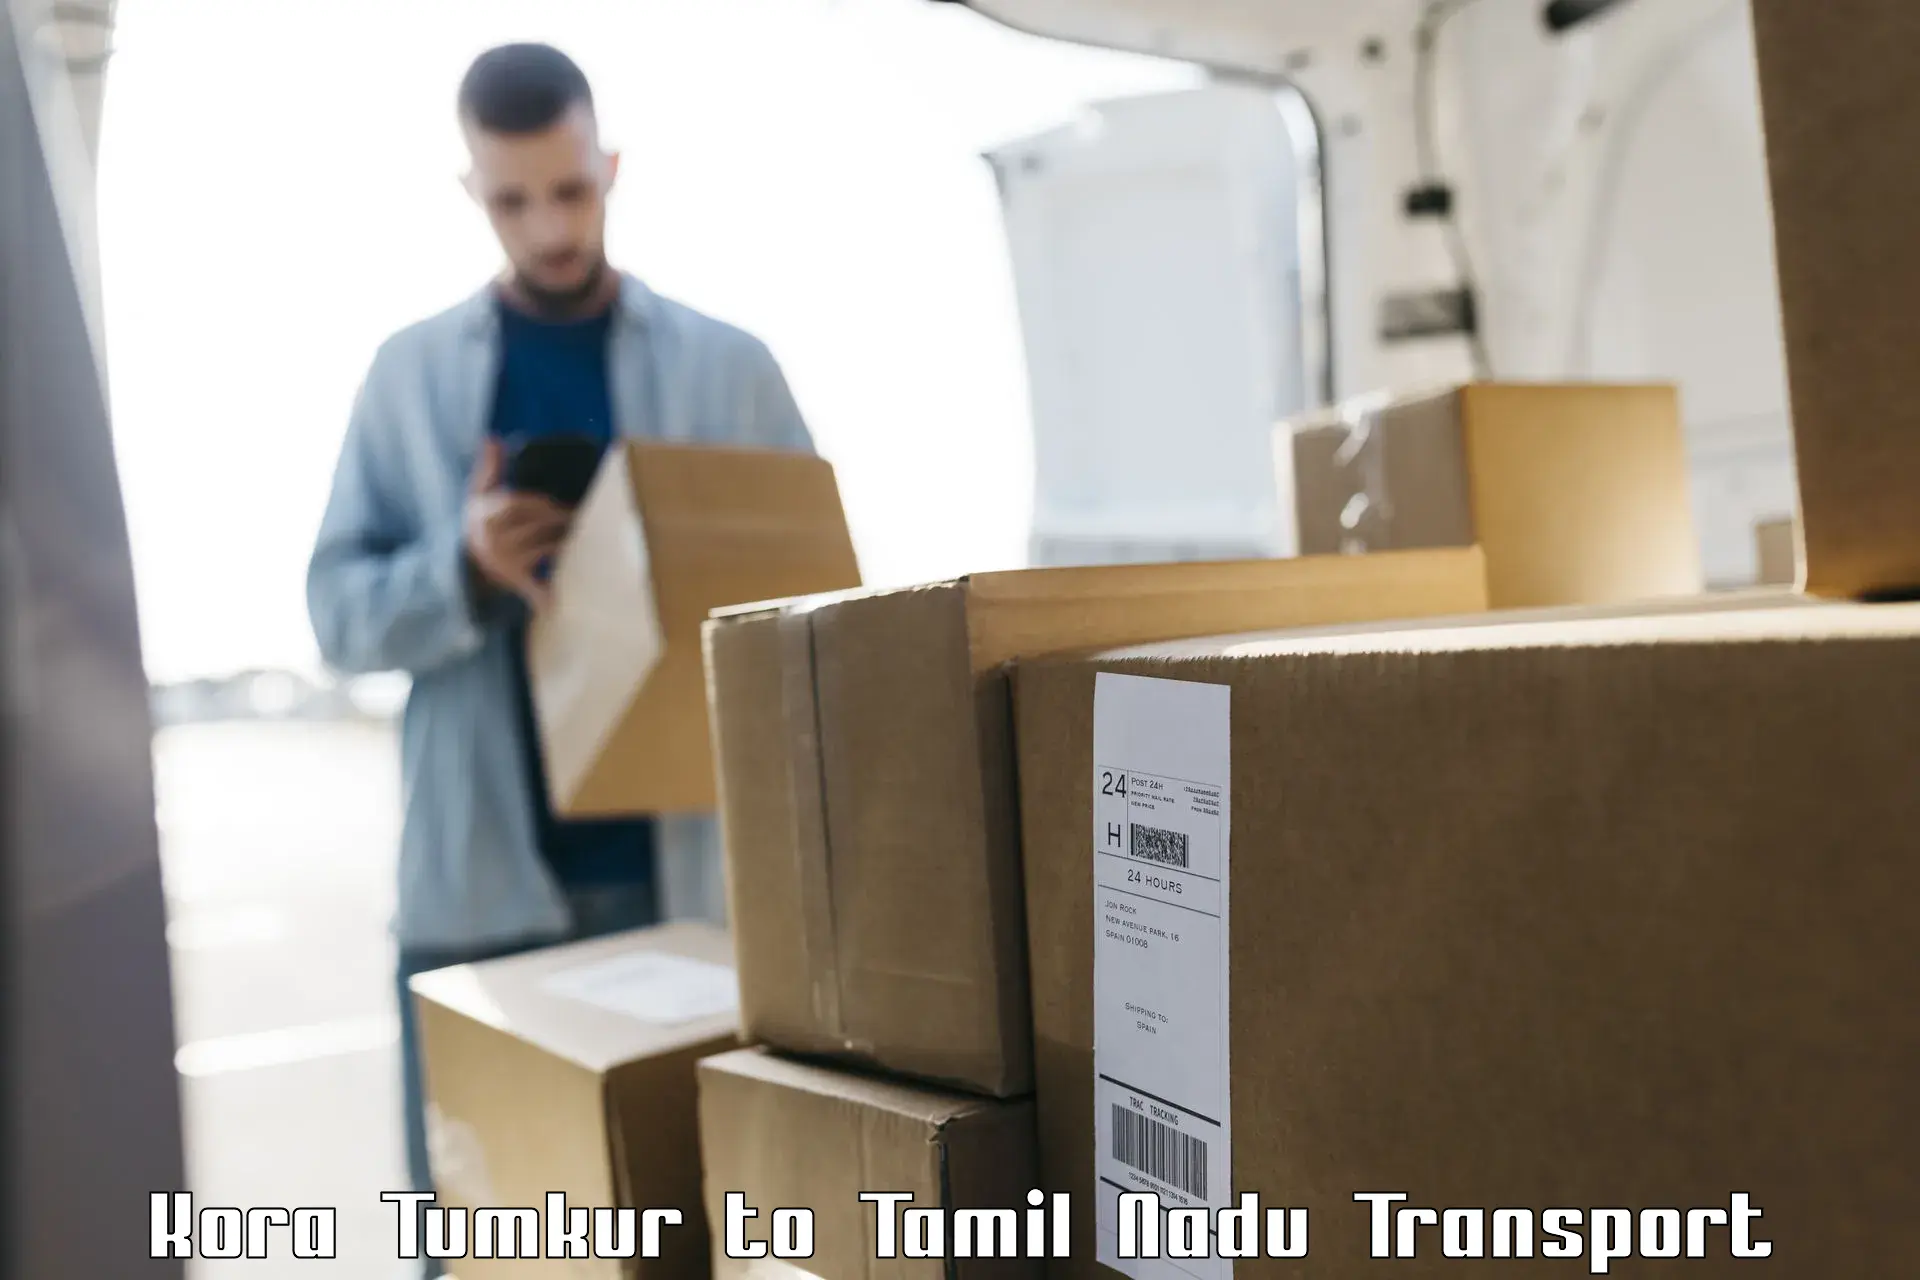 Interstate transport services Kora Tumkur to SRM Institute of Science and Technology Chennai